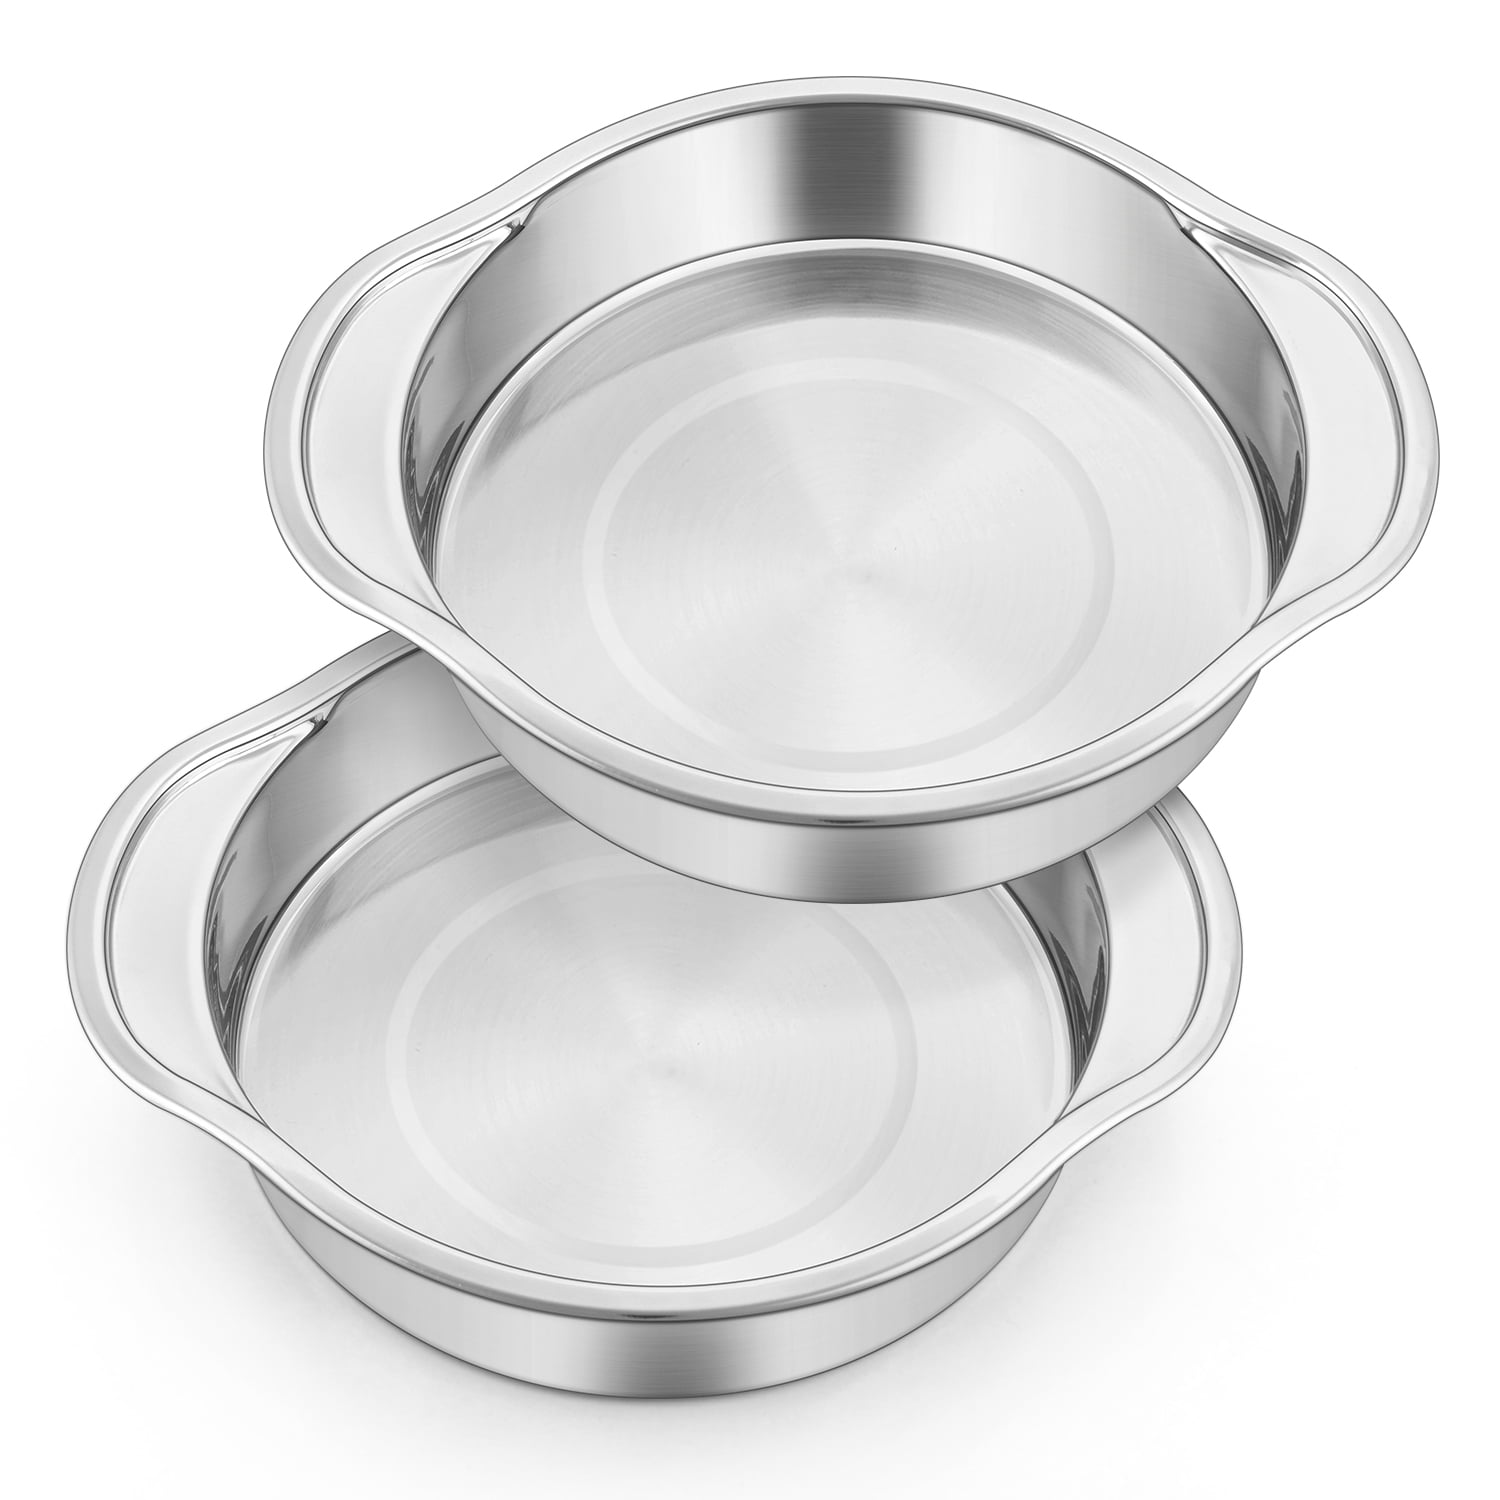 Round 8 inch Cake Pan with Cutter Bar, Set of 2 - The Vermont Country Store